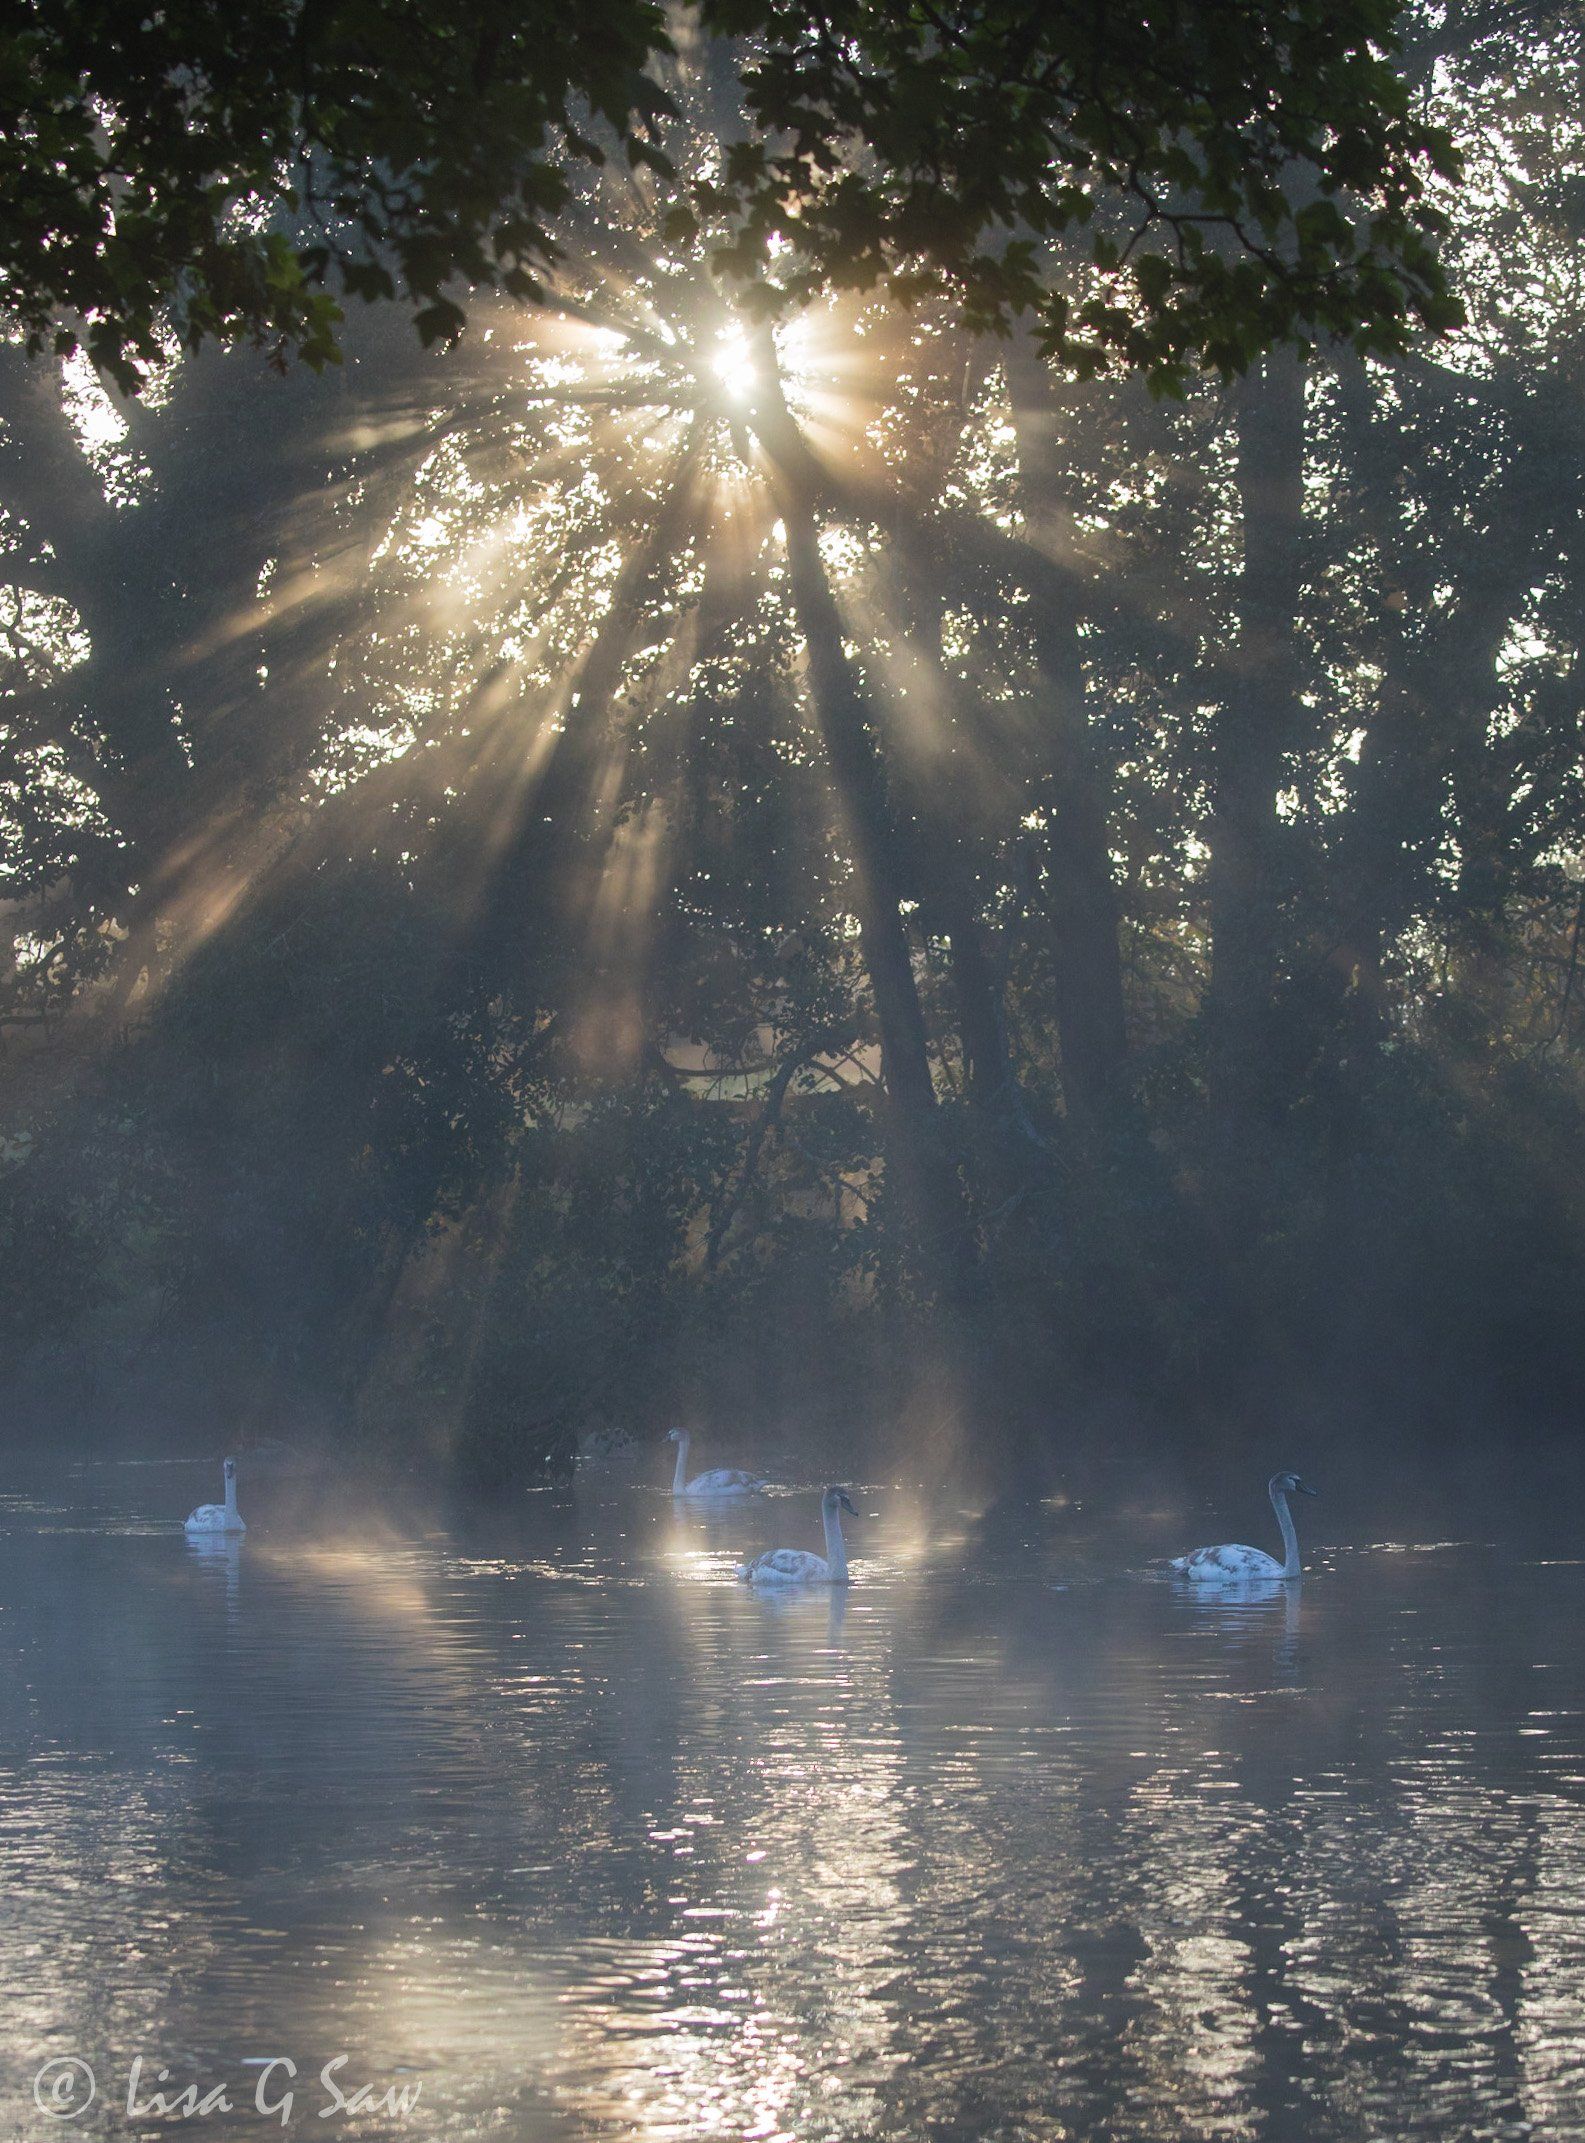 Swans swimming on river with beams of sunlight shining through the trees